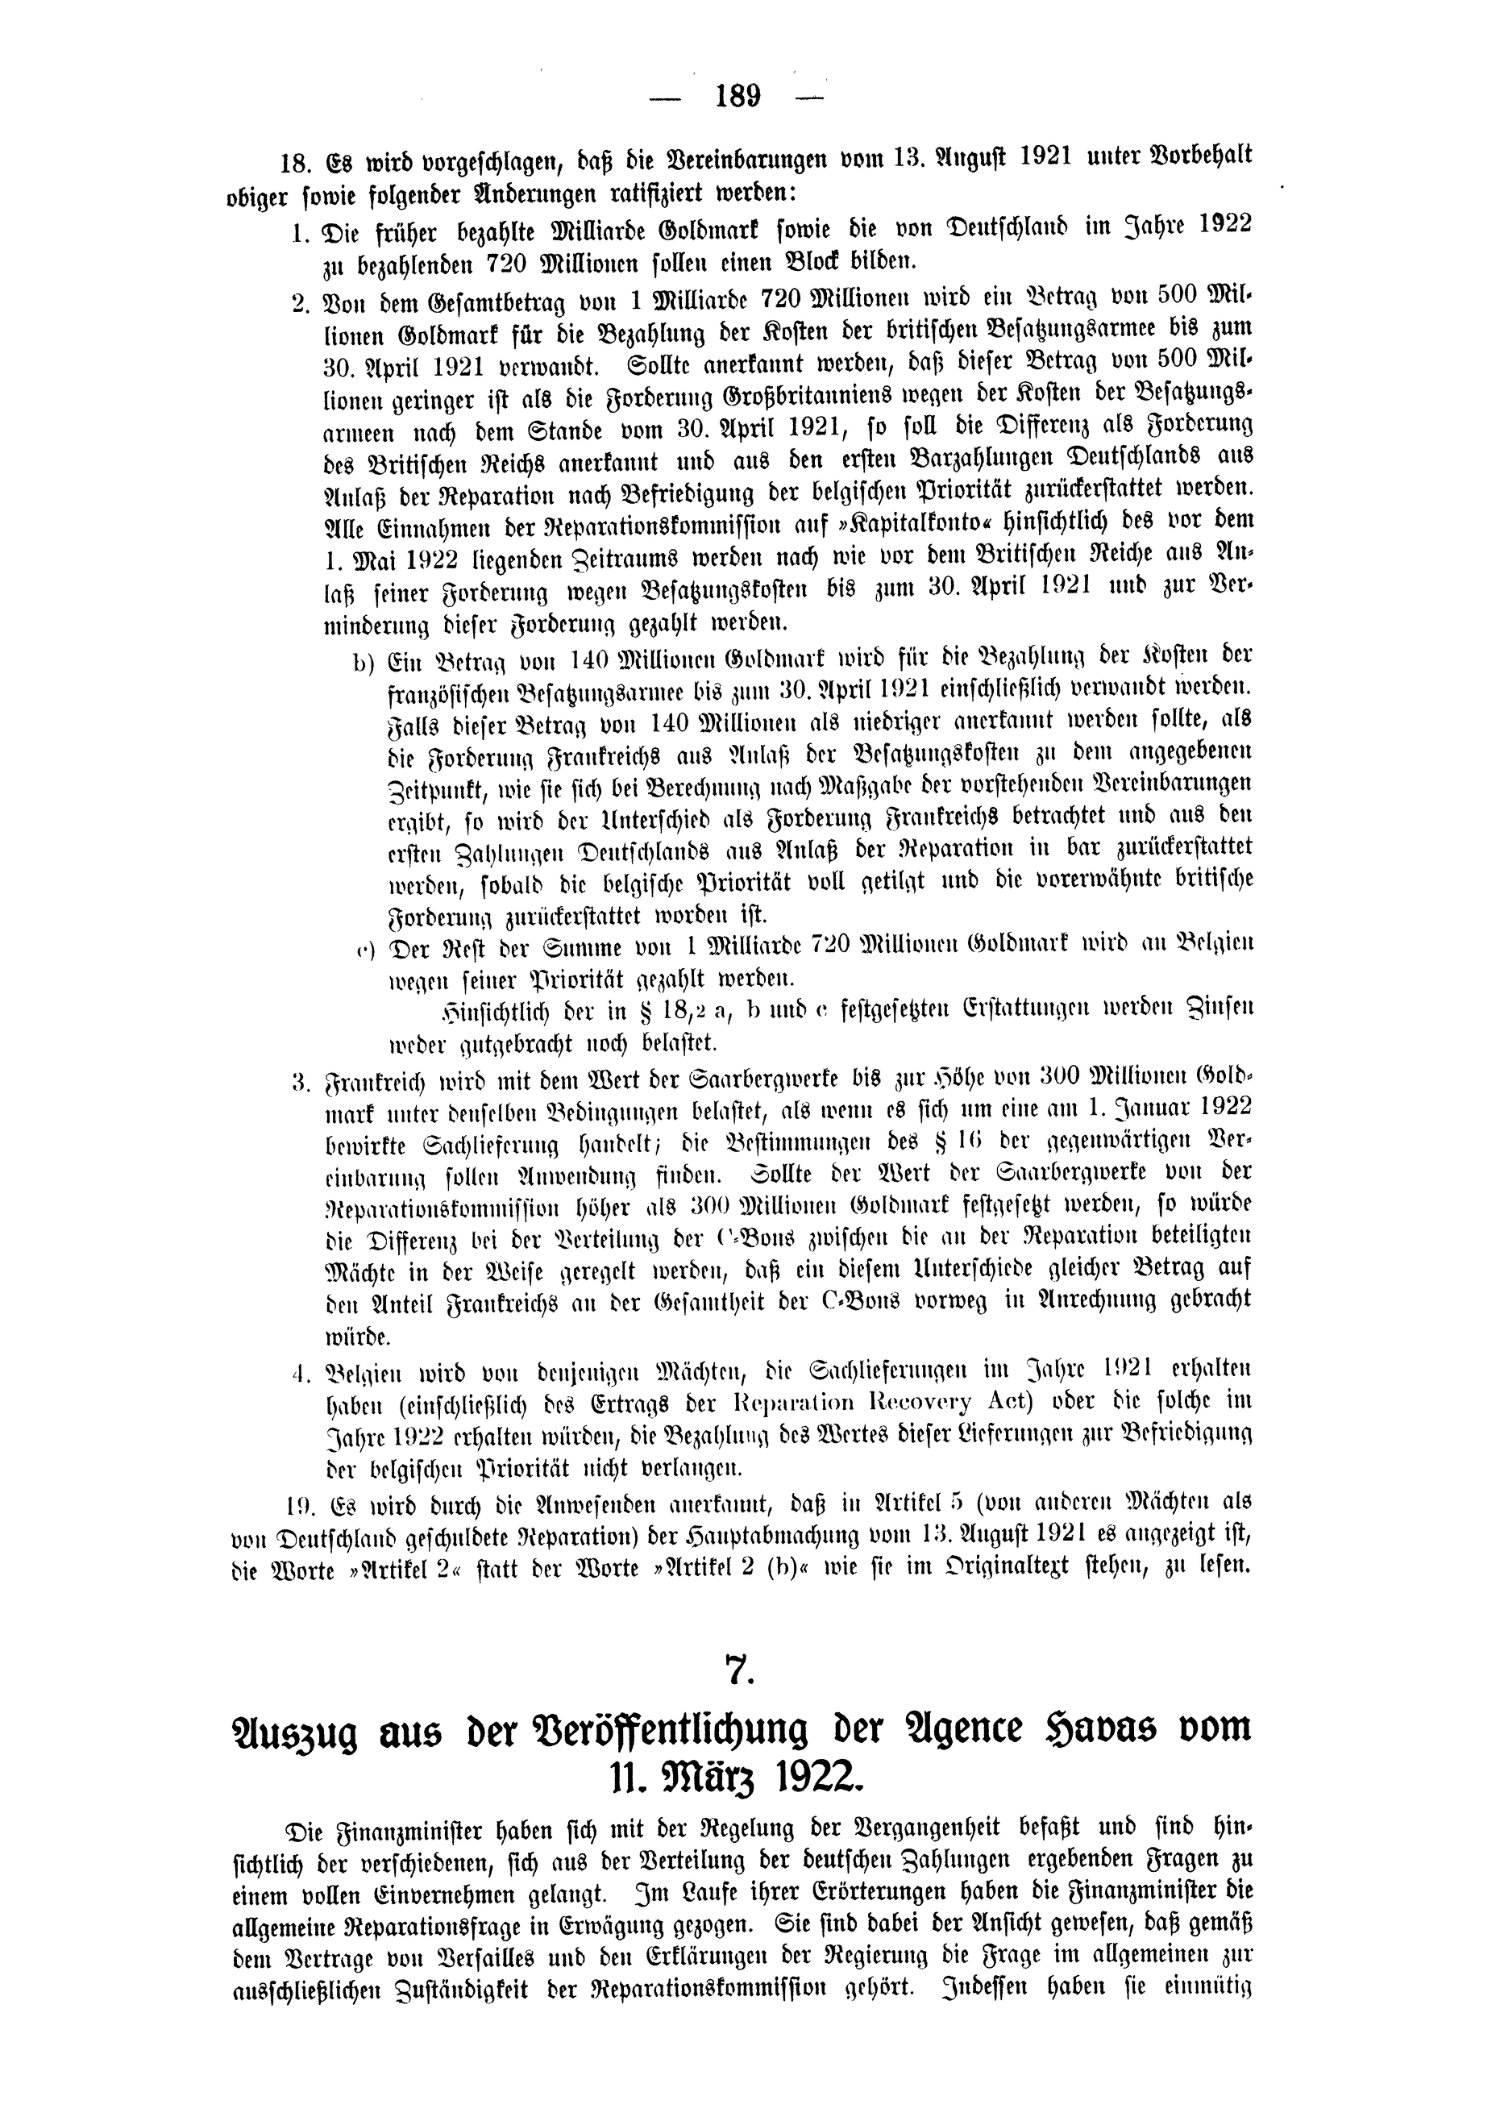 Scan of page 189